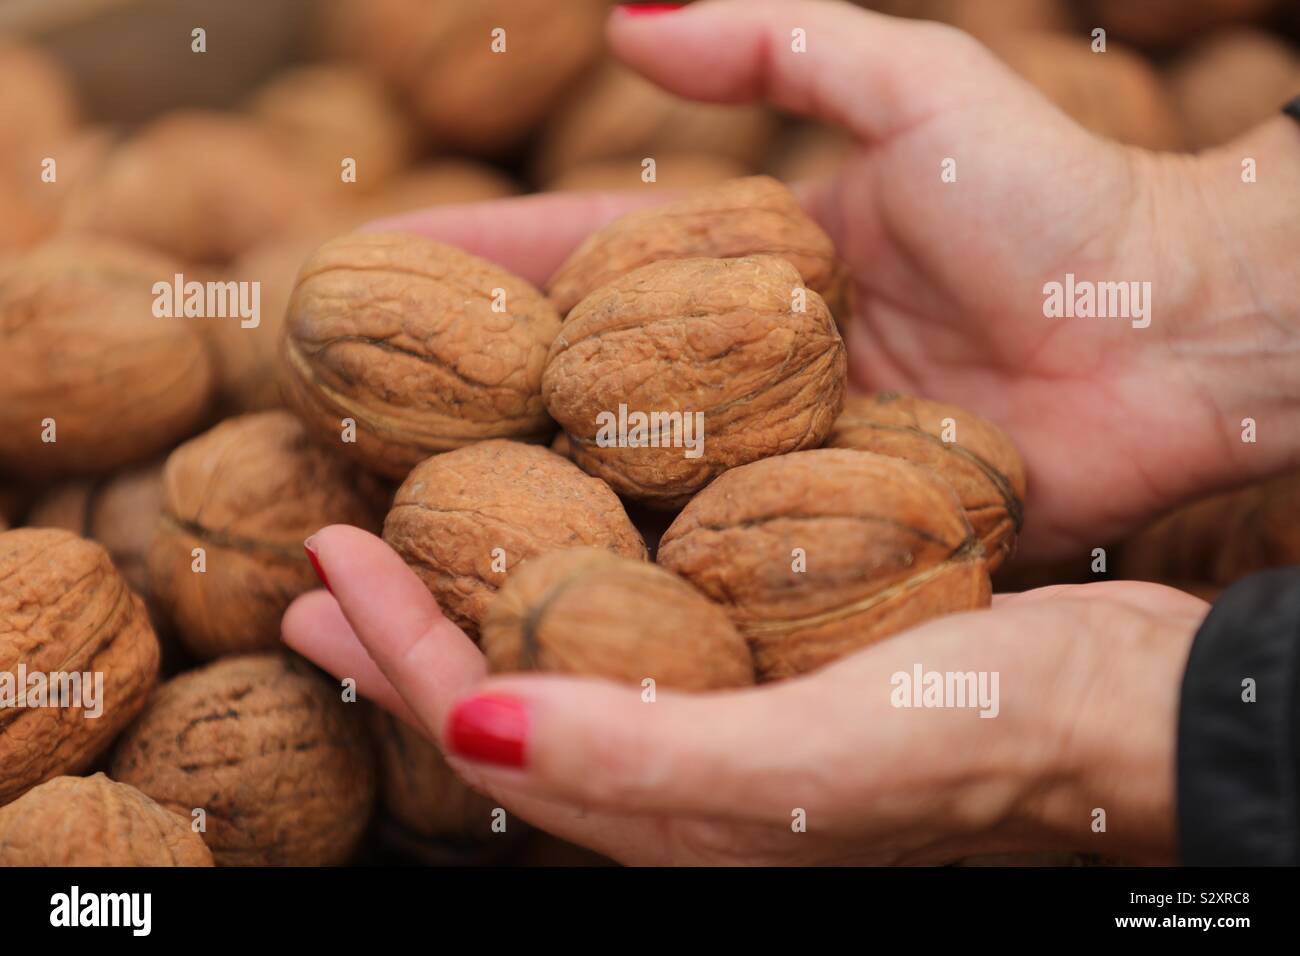 woman s hands holding walnuts, warm texture, lovely retro background, vegan food, walnuts, nuts, autumn Stock Photo